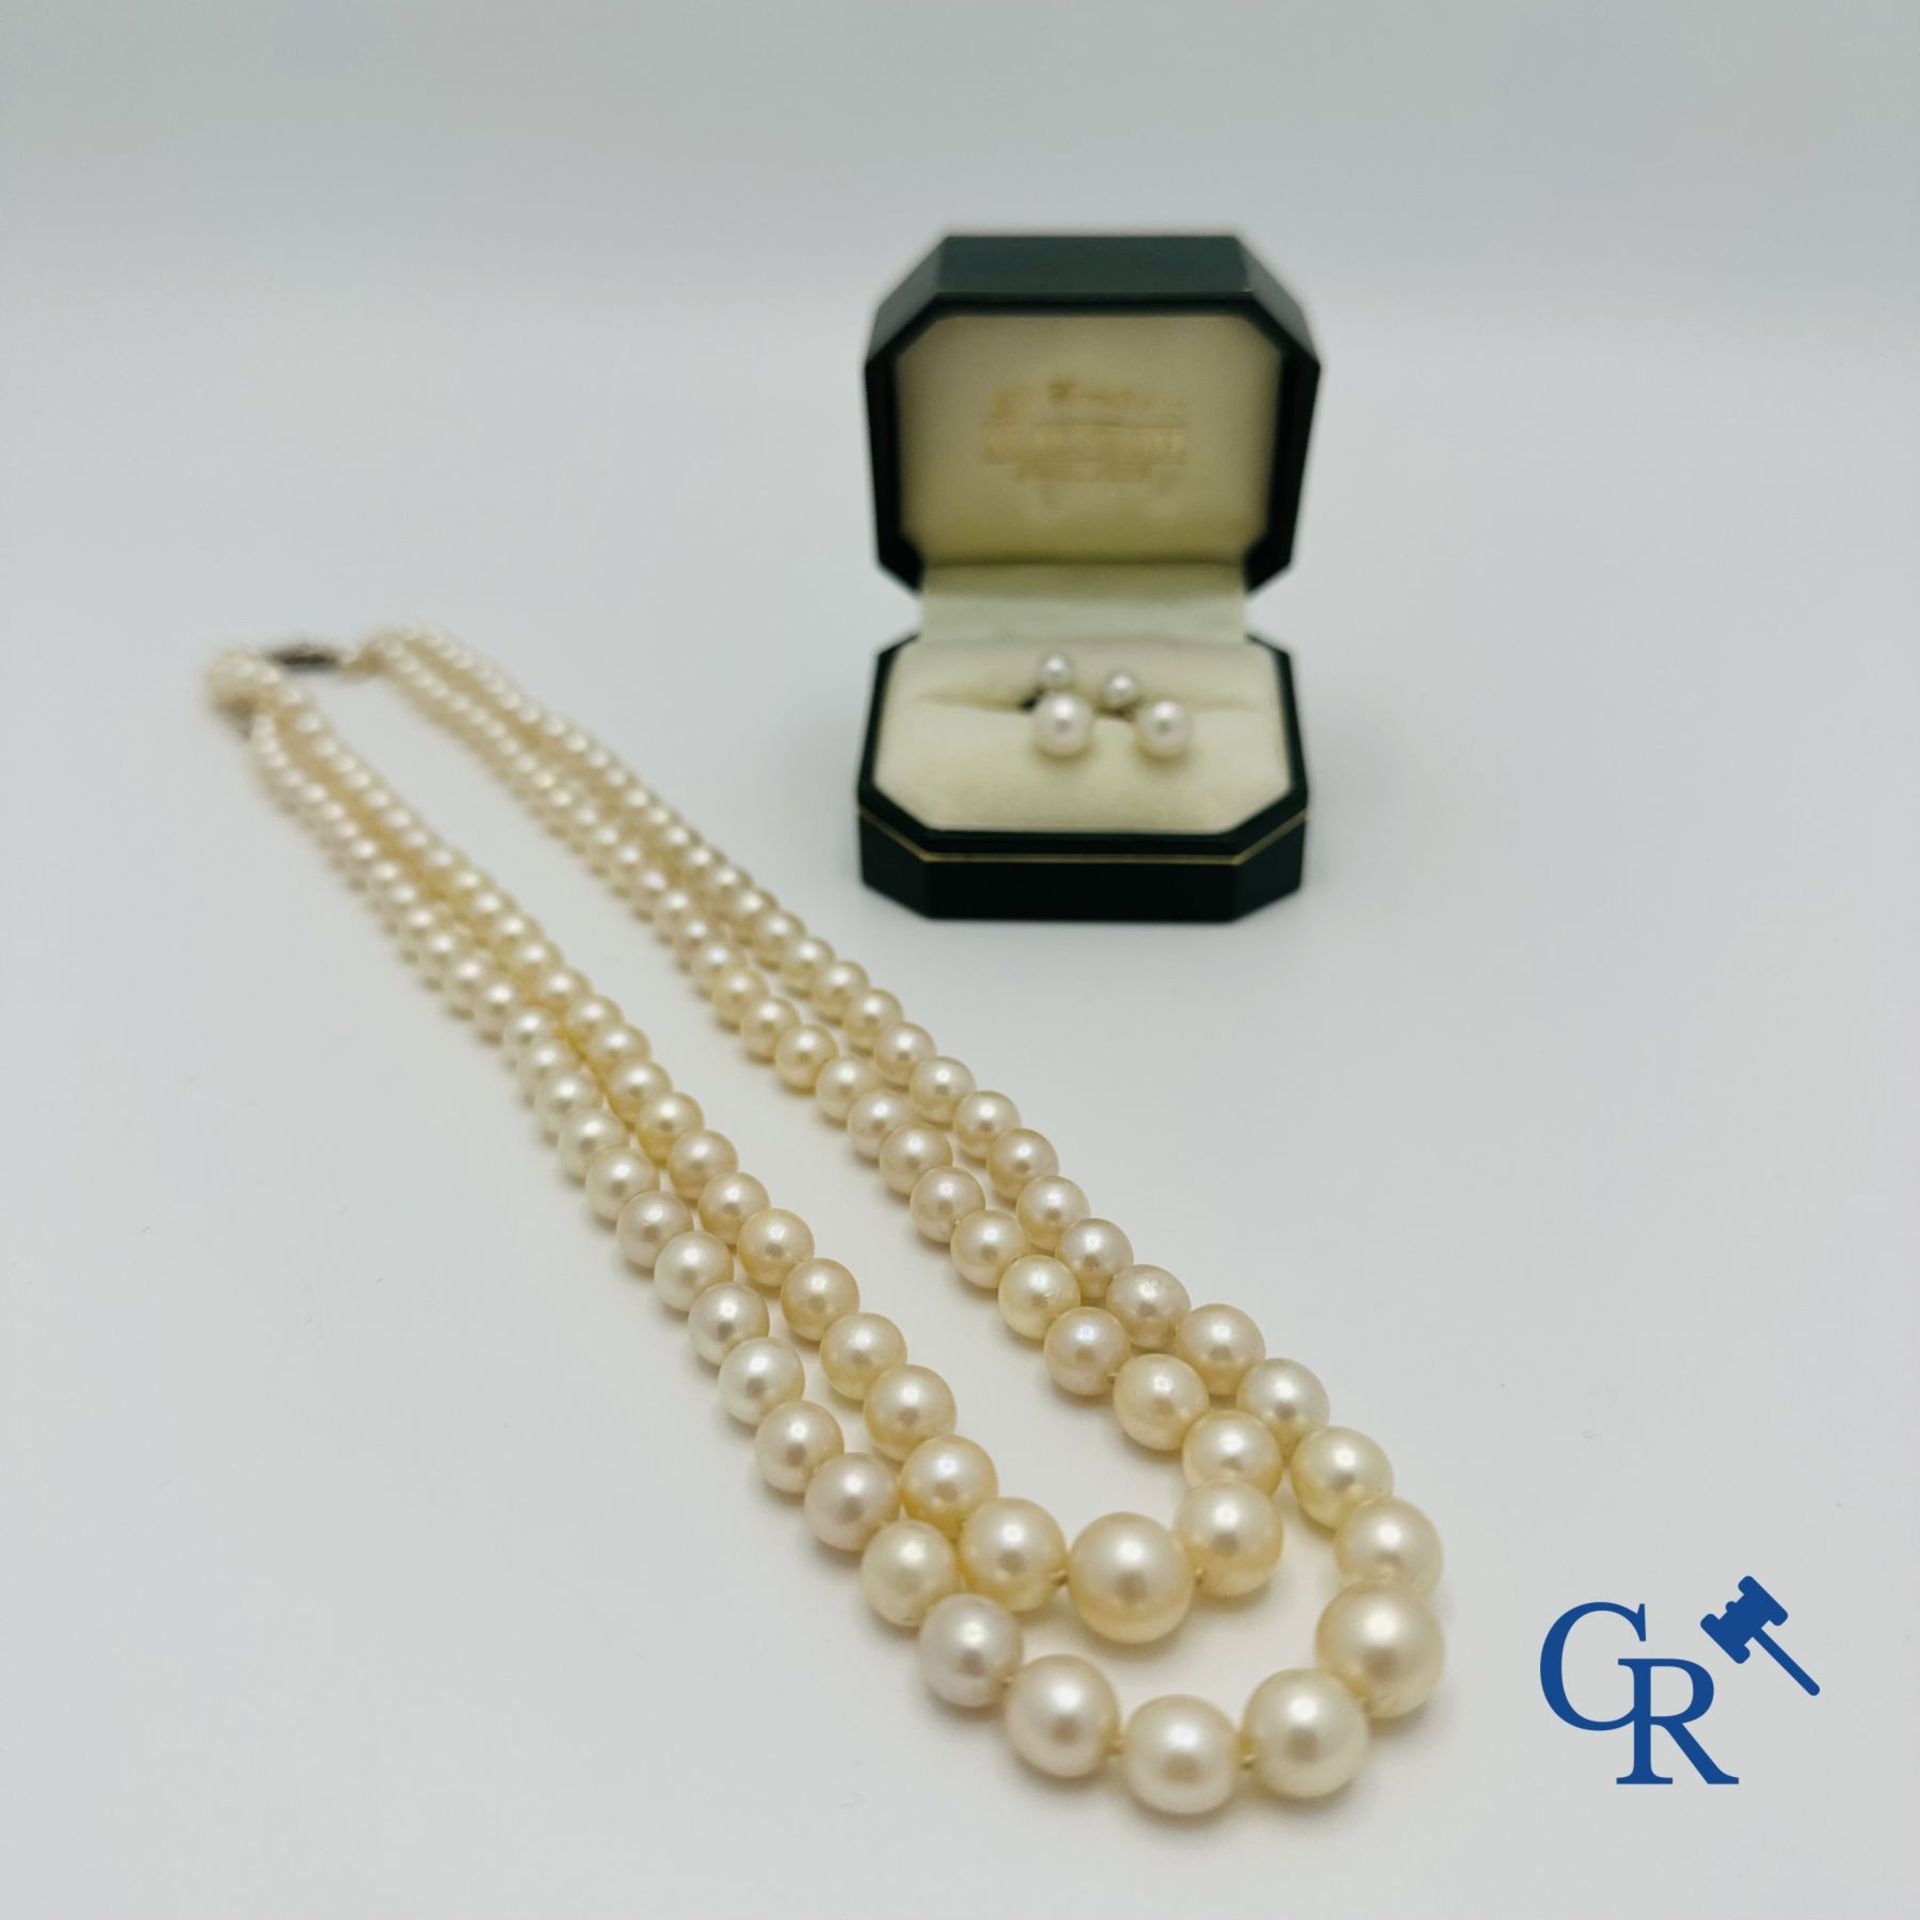 Jewellery: Lot consisting of a pearl necklace with gold clasp 18K and a pair of earrings in white go - Image 2 of 5